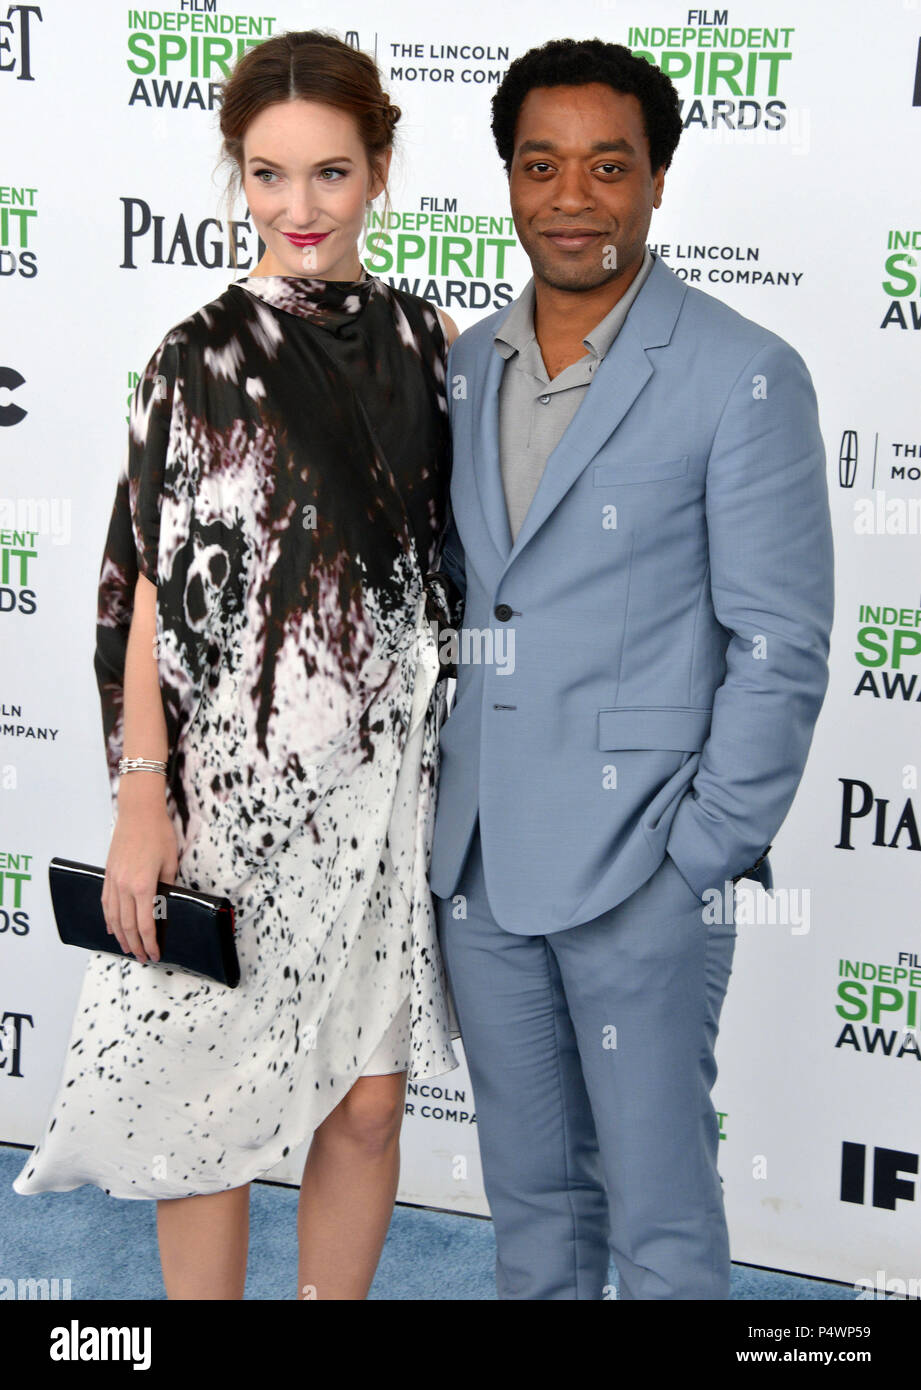 Sari Mercer, Chiwetel Ejiofor  at the Film Independent Spirit Awards 2014on the Santa Monica Beach In Los Angeles.Sari Mercer, Chiwetel Ejiofor  copy ------------- Red Carpet Event, Vertical, USA, Film Industry, Celebrities,  Photography, Bestof, Arts Culture and Entertainment, Topix Celebrities fashion /  Vertical, Best of, Event in Hollywood Life - California,  Red Carpet and backstage, USA, Film Industry, Celebrities,  movie celebrities, TV celebrities, Music celebrities, Photography, Bestof, Arts Culture and Entertainment,  Topix, vertical,  family from from the year , 2014, inquiry tsuni@ Stock Photo